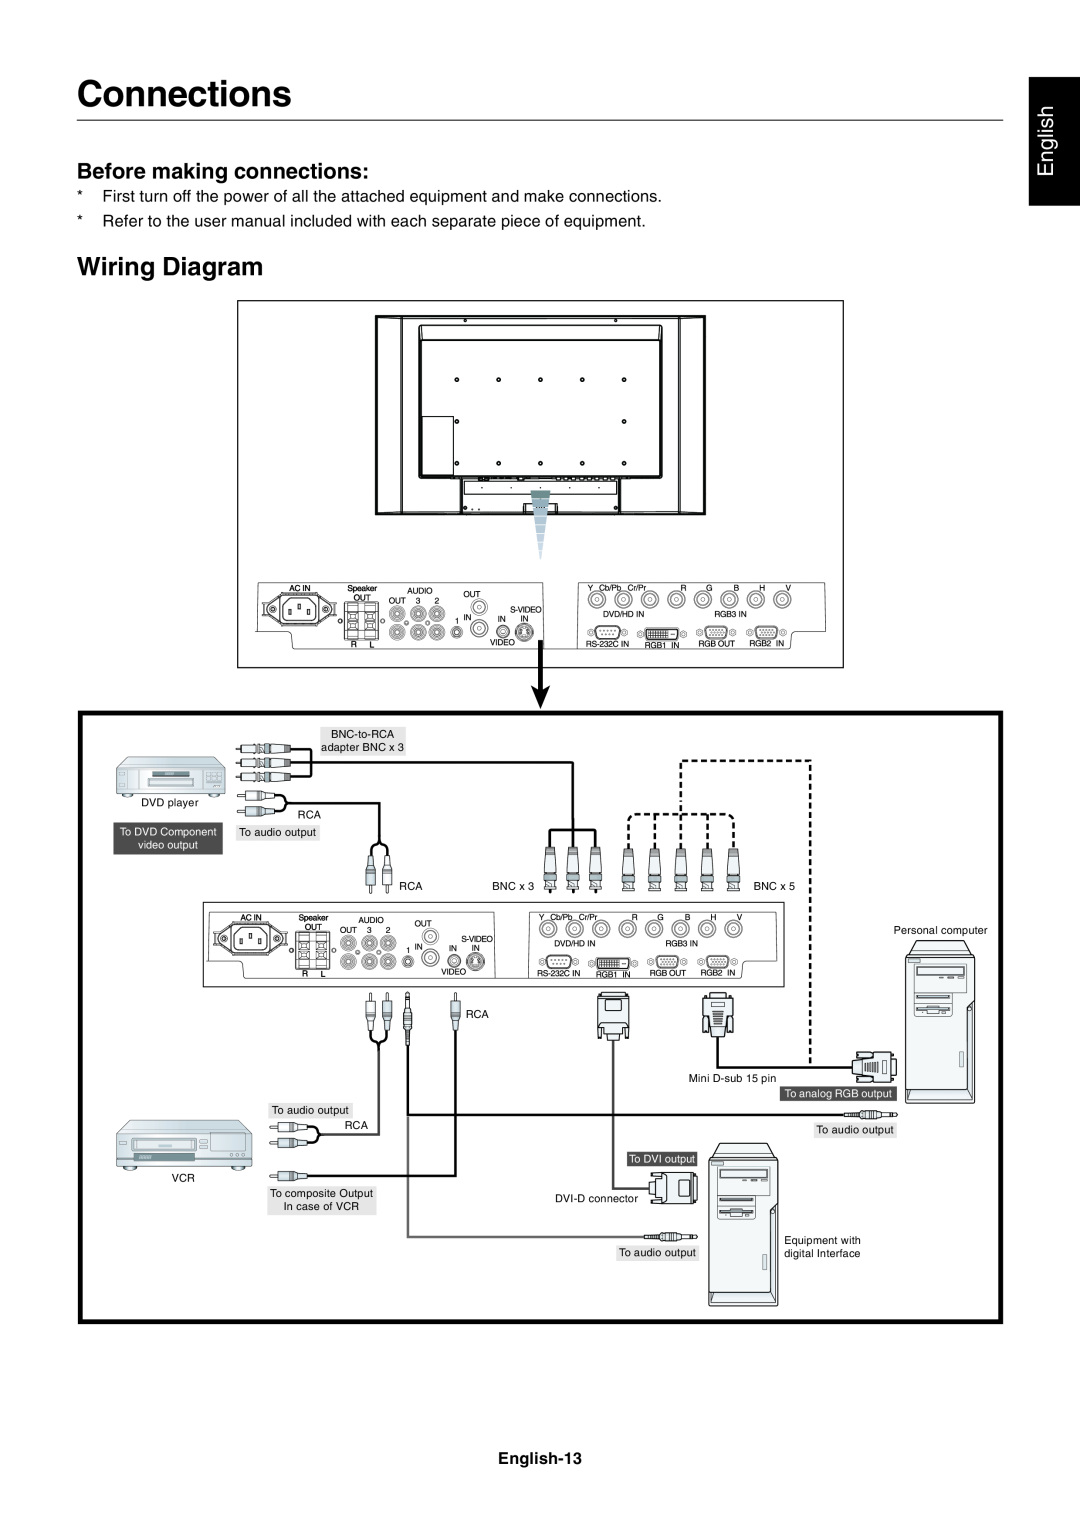 NEC LCD4615 user manual Connections, Wiring Diagram, Before making connections, English 